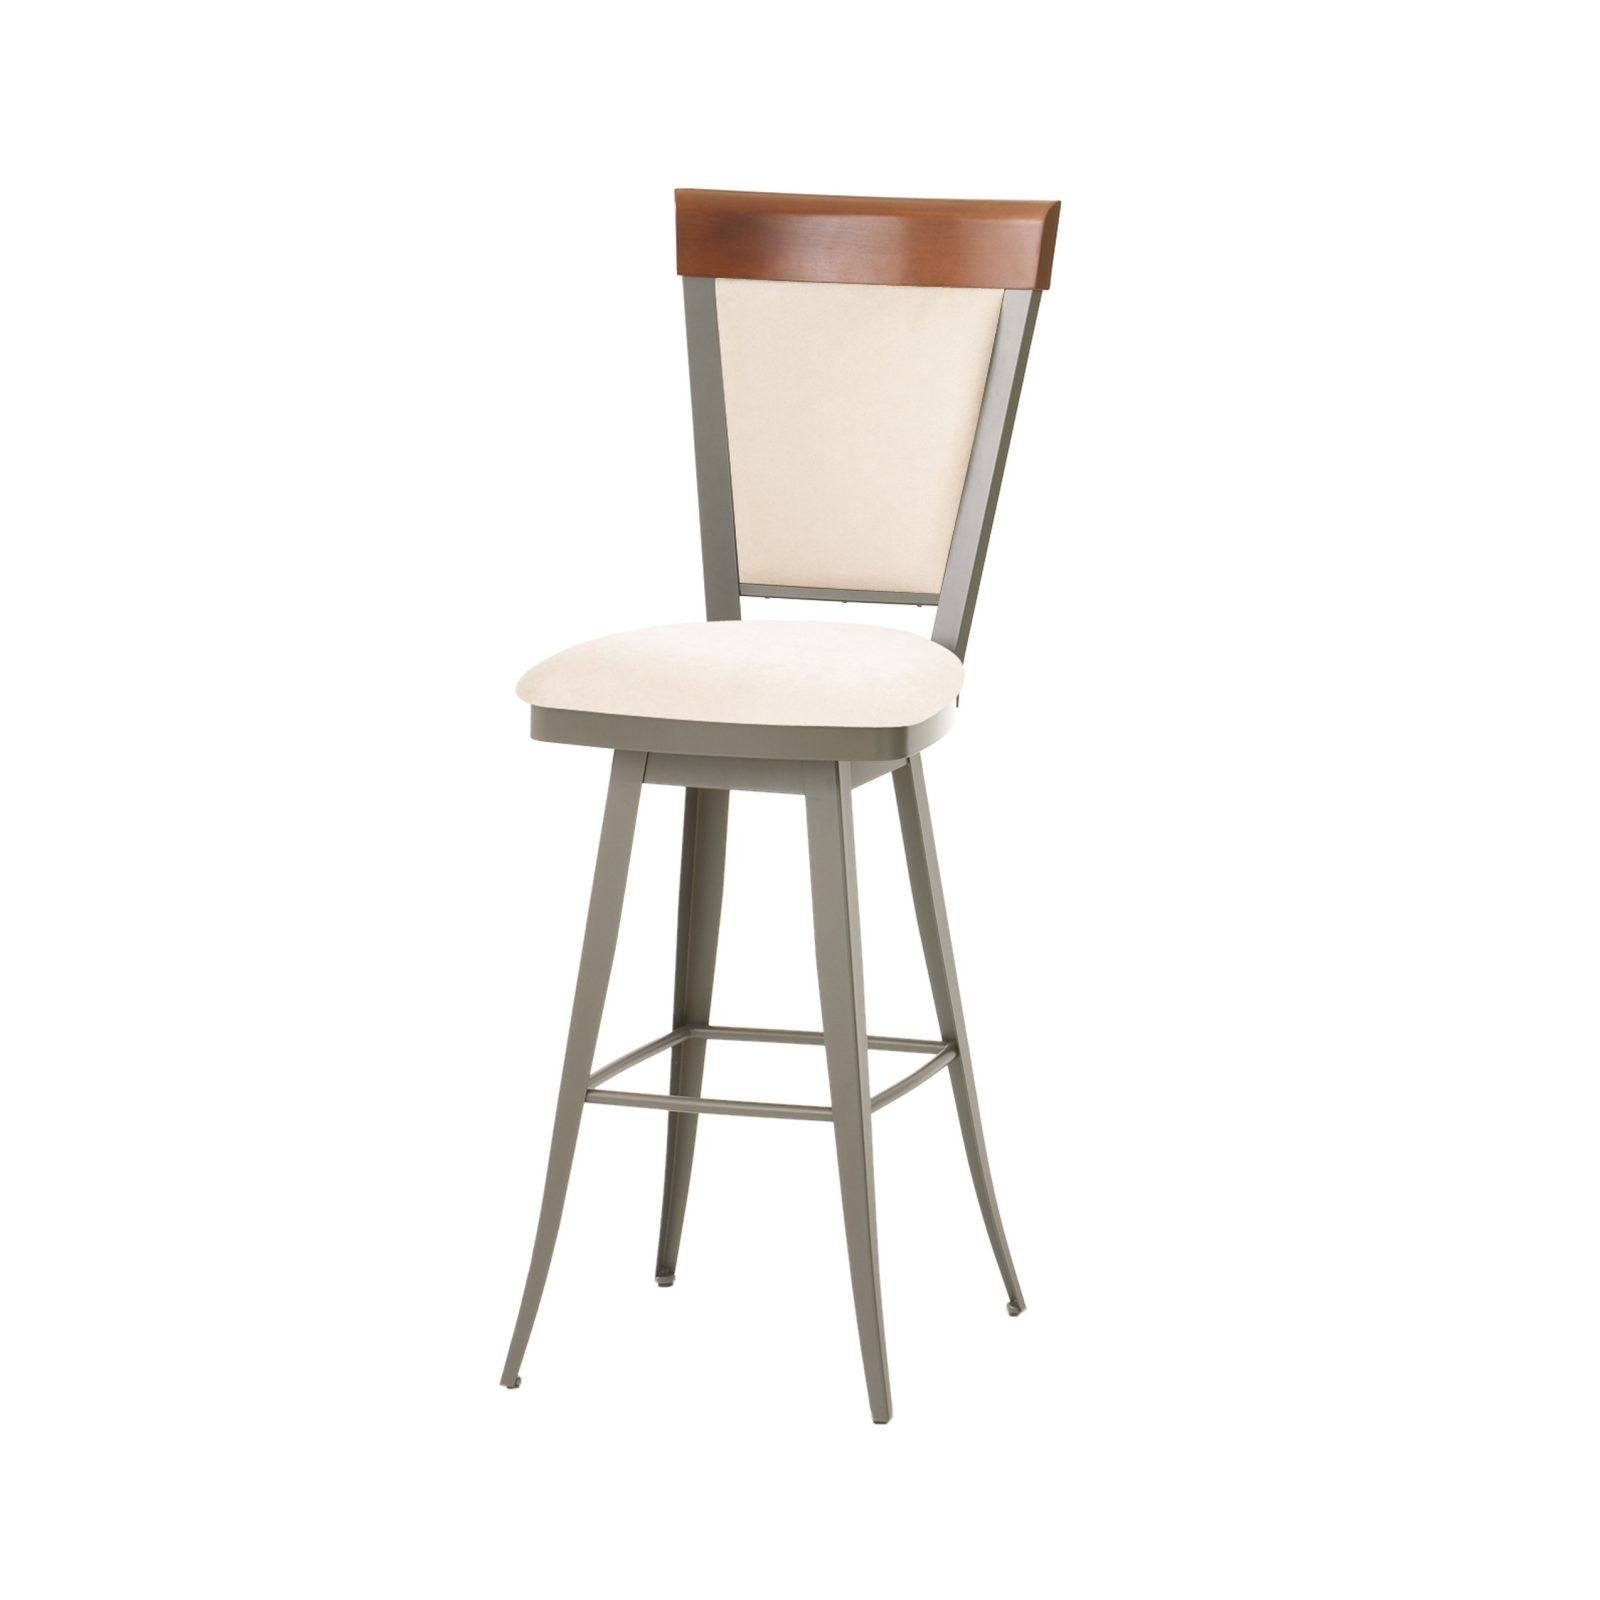 Metal Finish: 57 Metallo • Seat Covering: Discontinued • Wood Back: 95 Cognac Discontinued